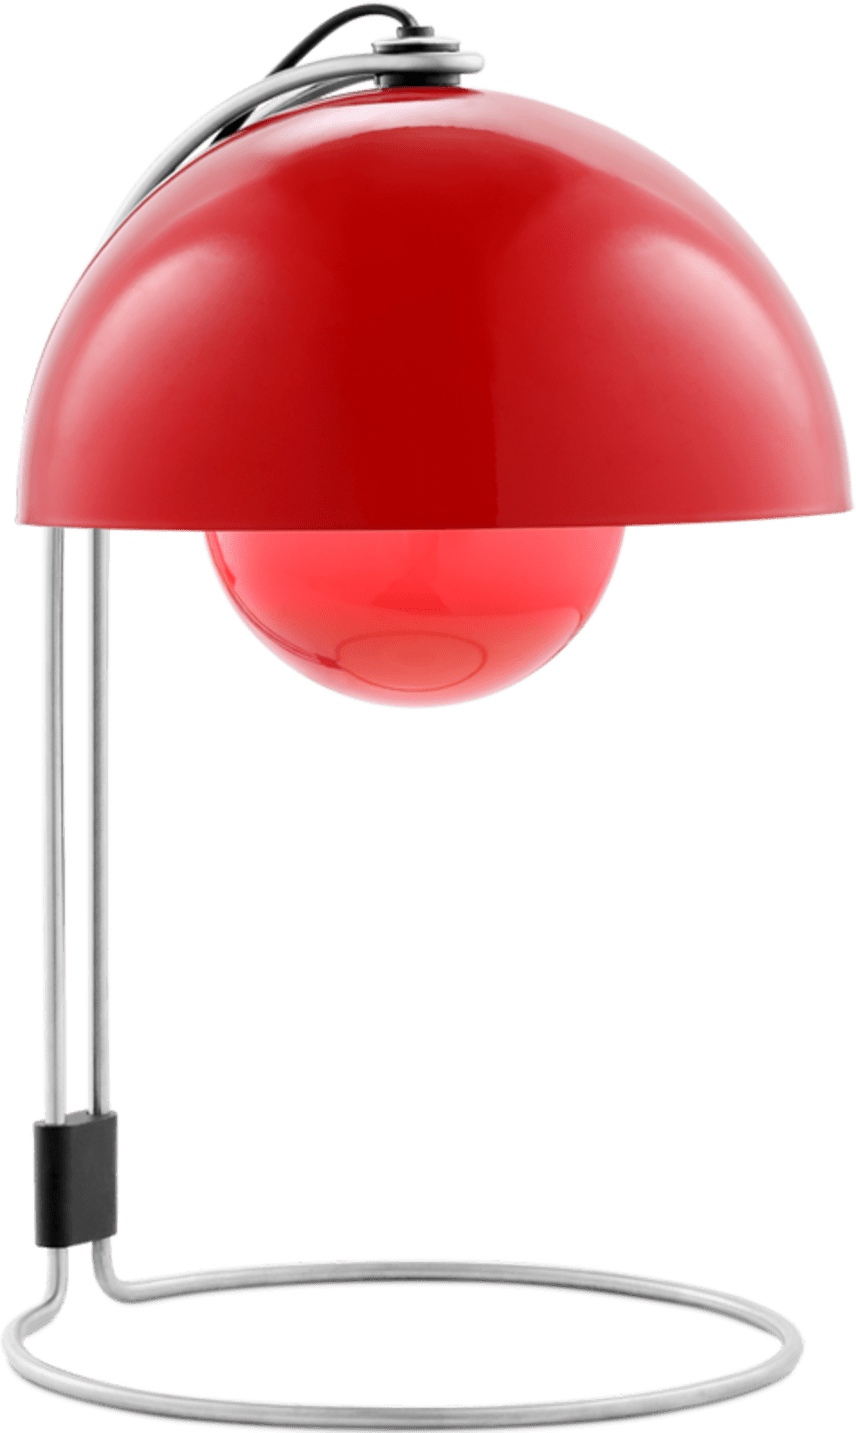 Flowerpot VP4 Style Table Lamp Red image.